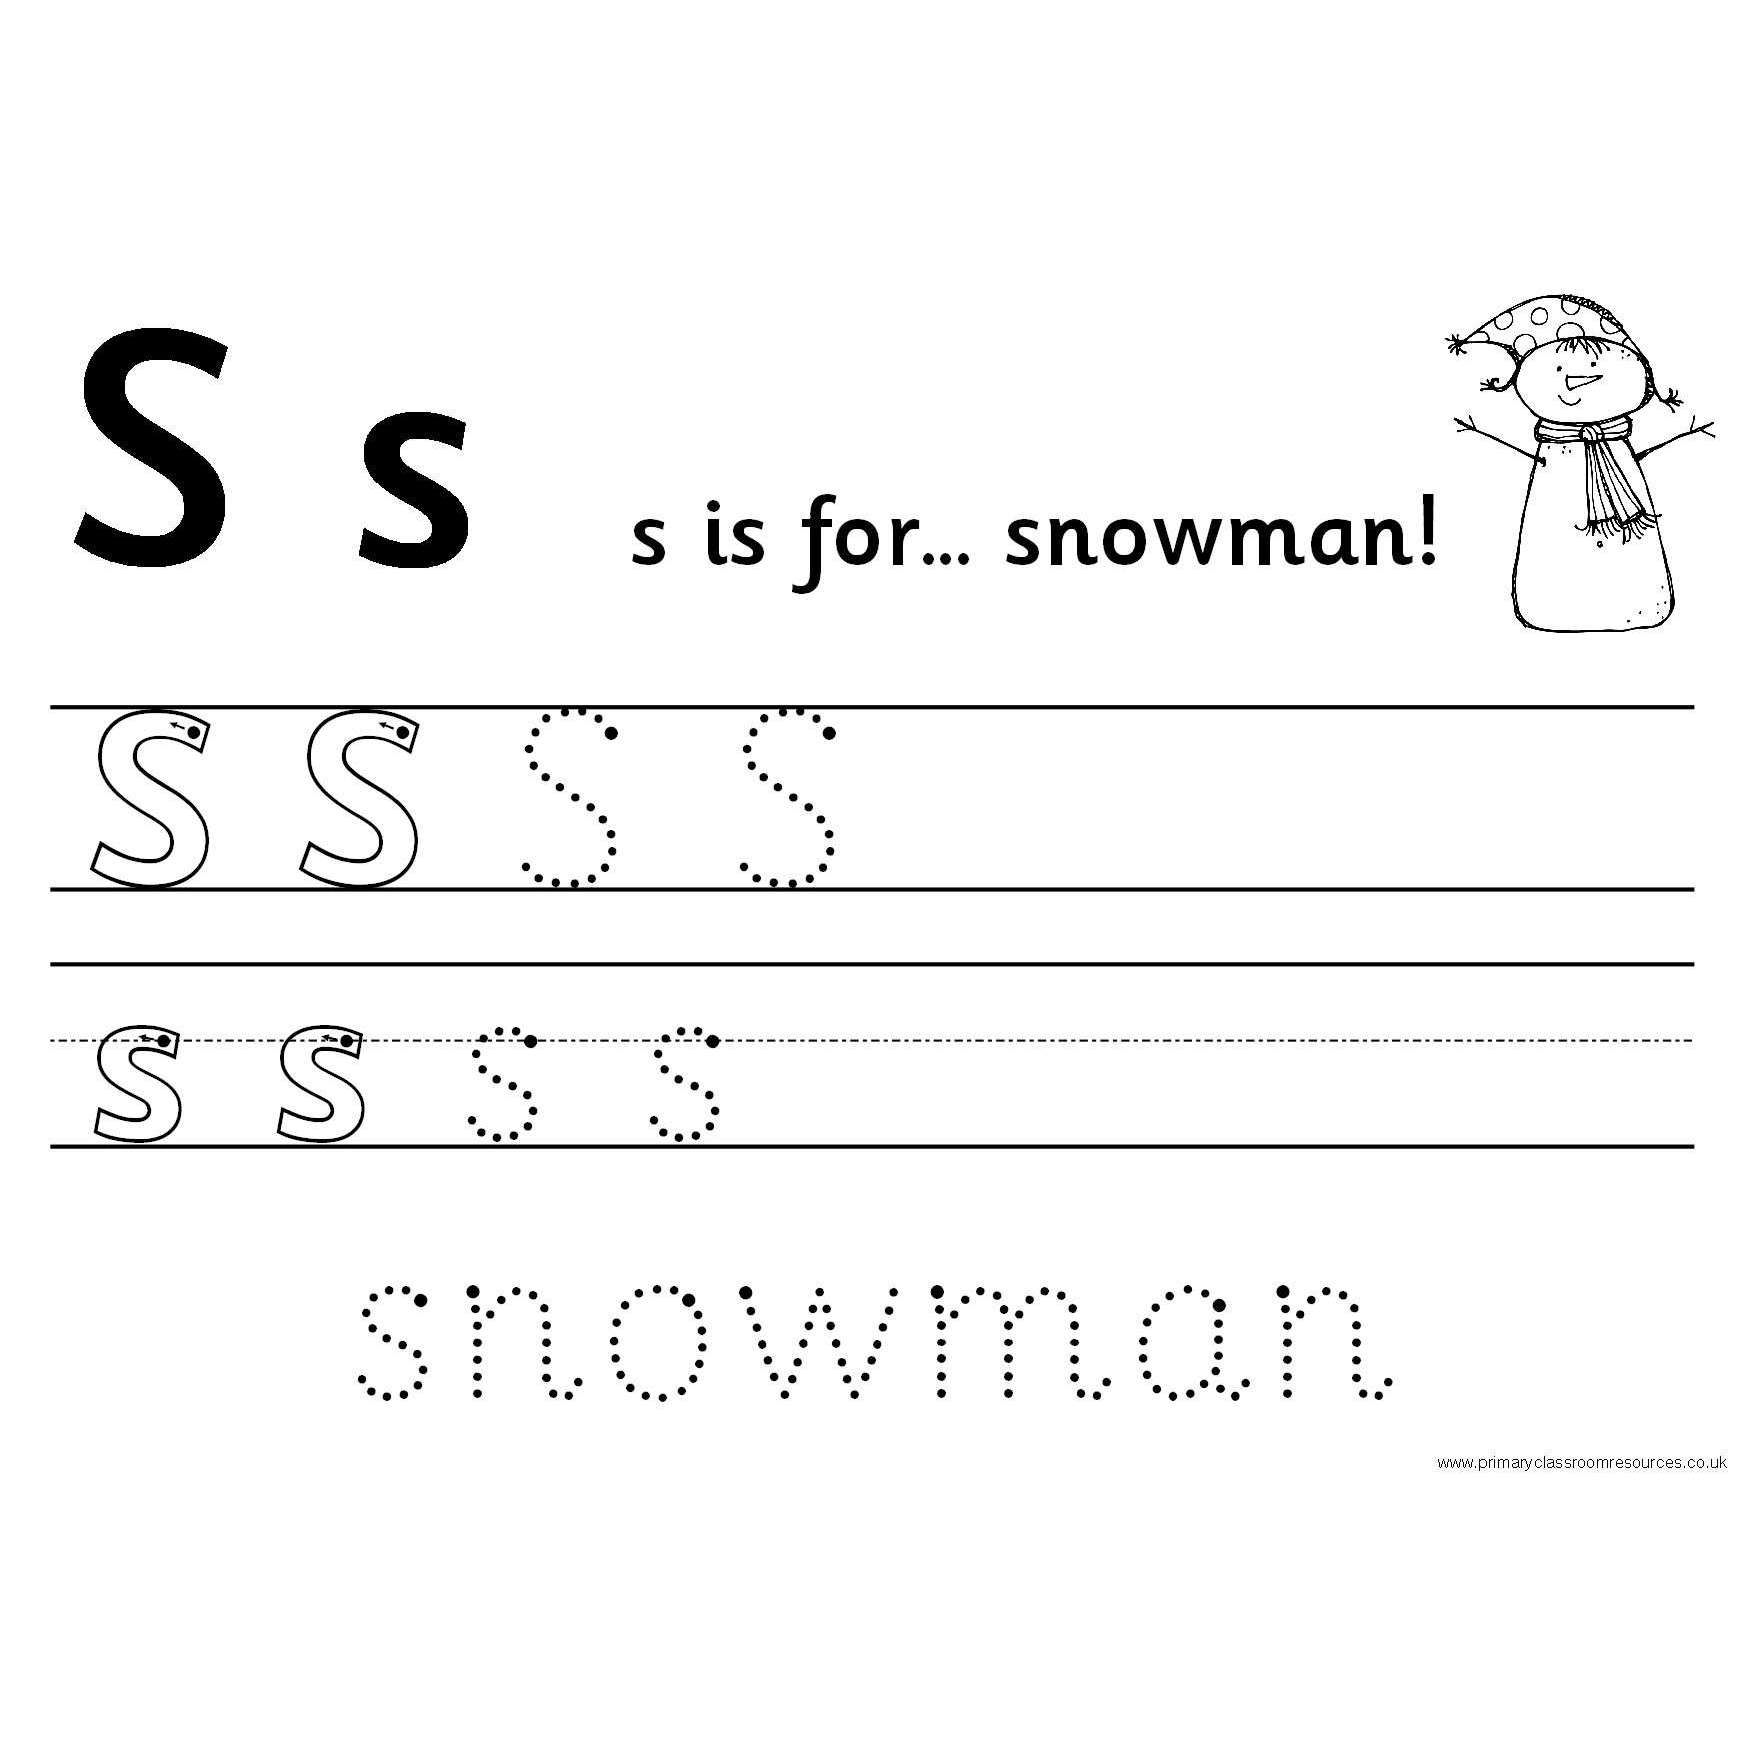 Handwriting Activity Sheets - Letters and Sounds Phase 2:Primary Classroom Resources